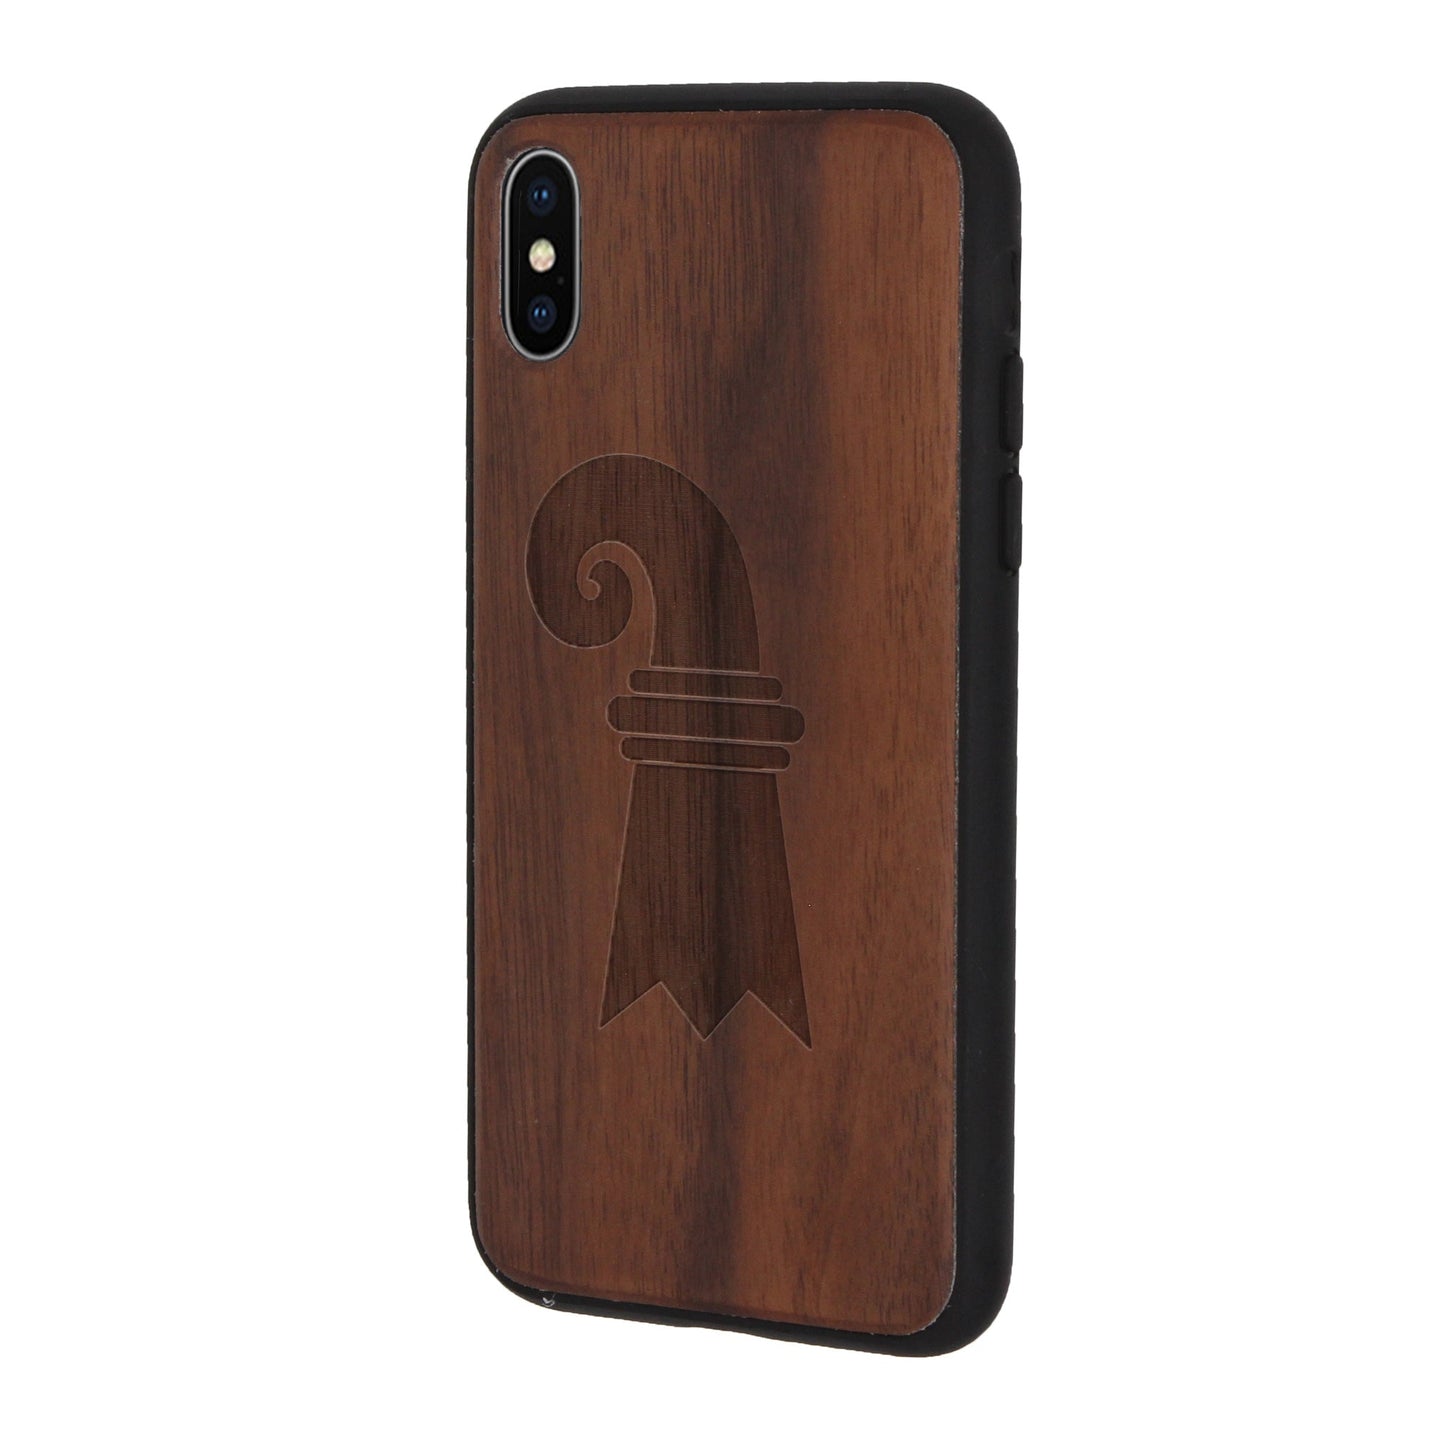 Baslerstab Eden case made of walnut wood for iPhone X/XS